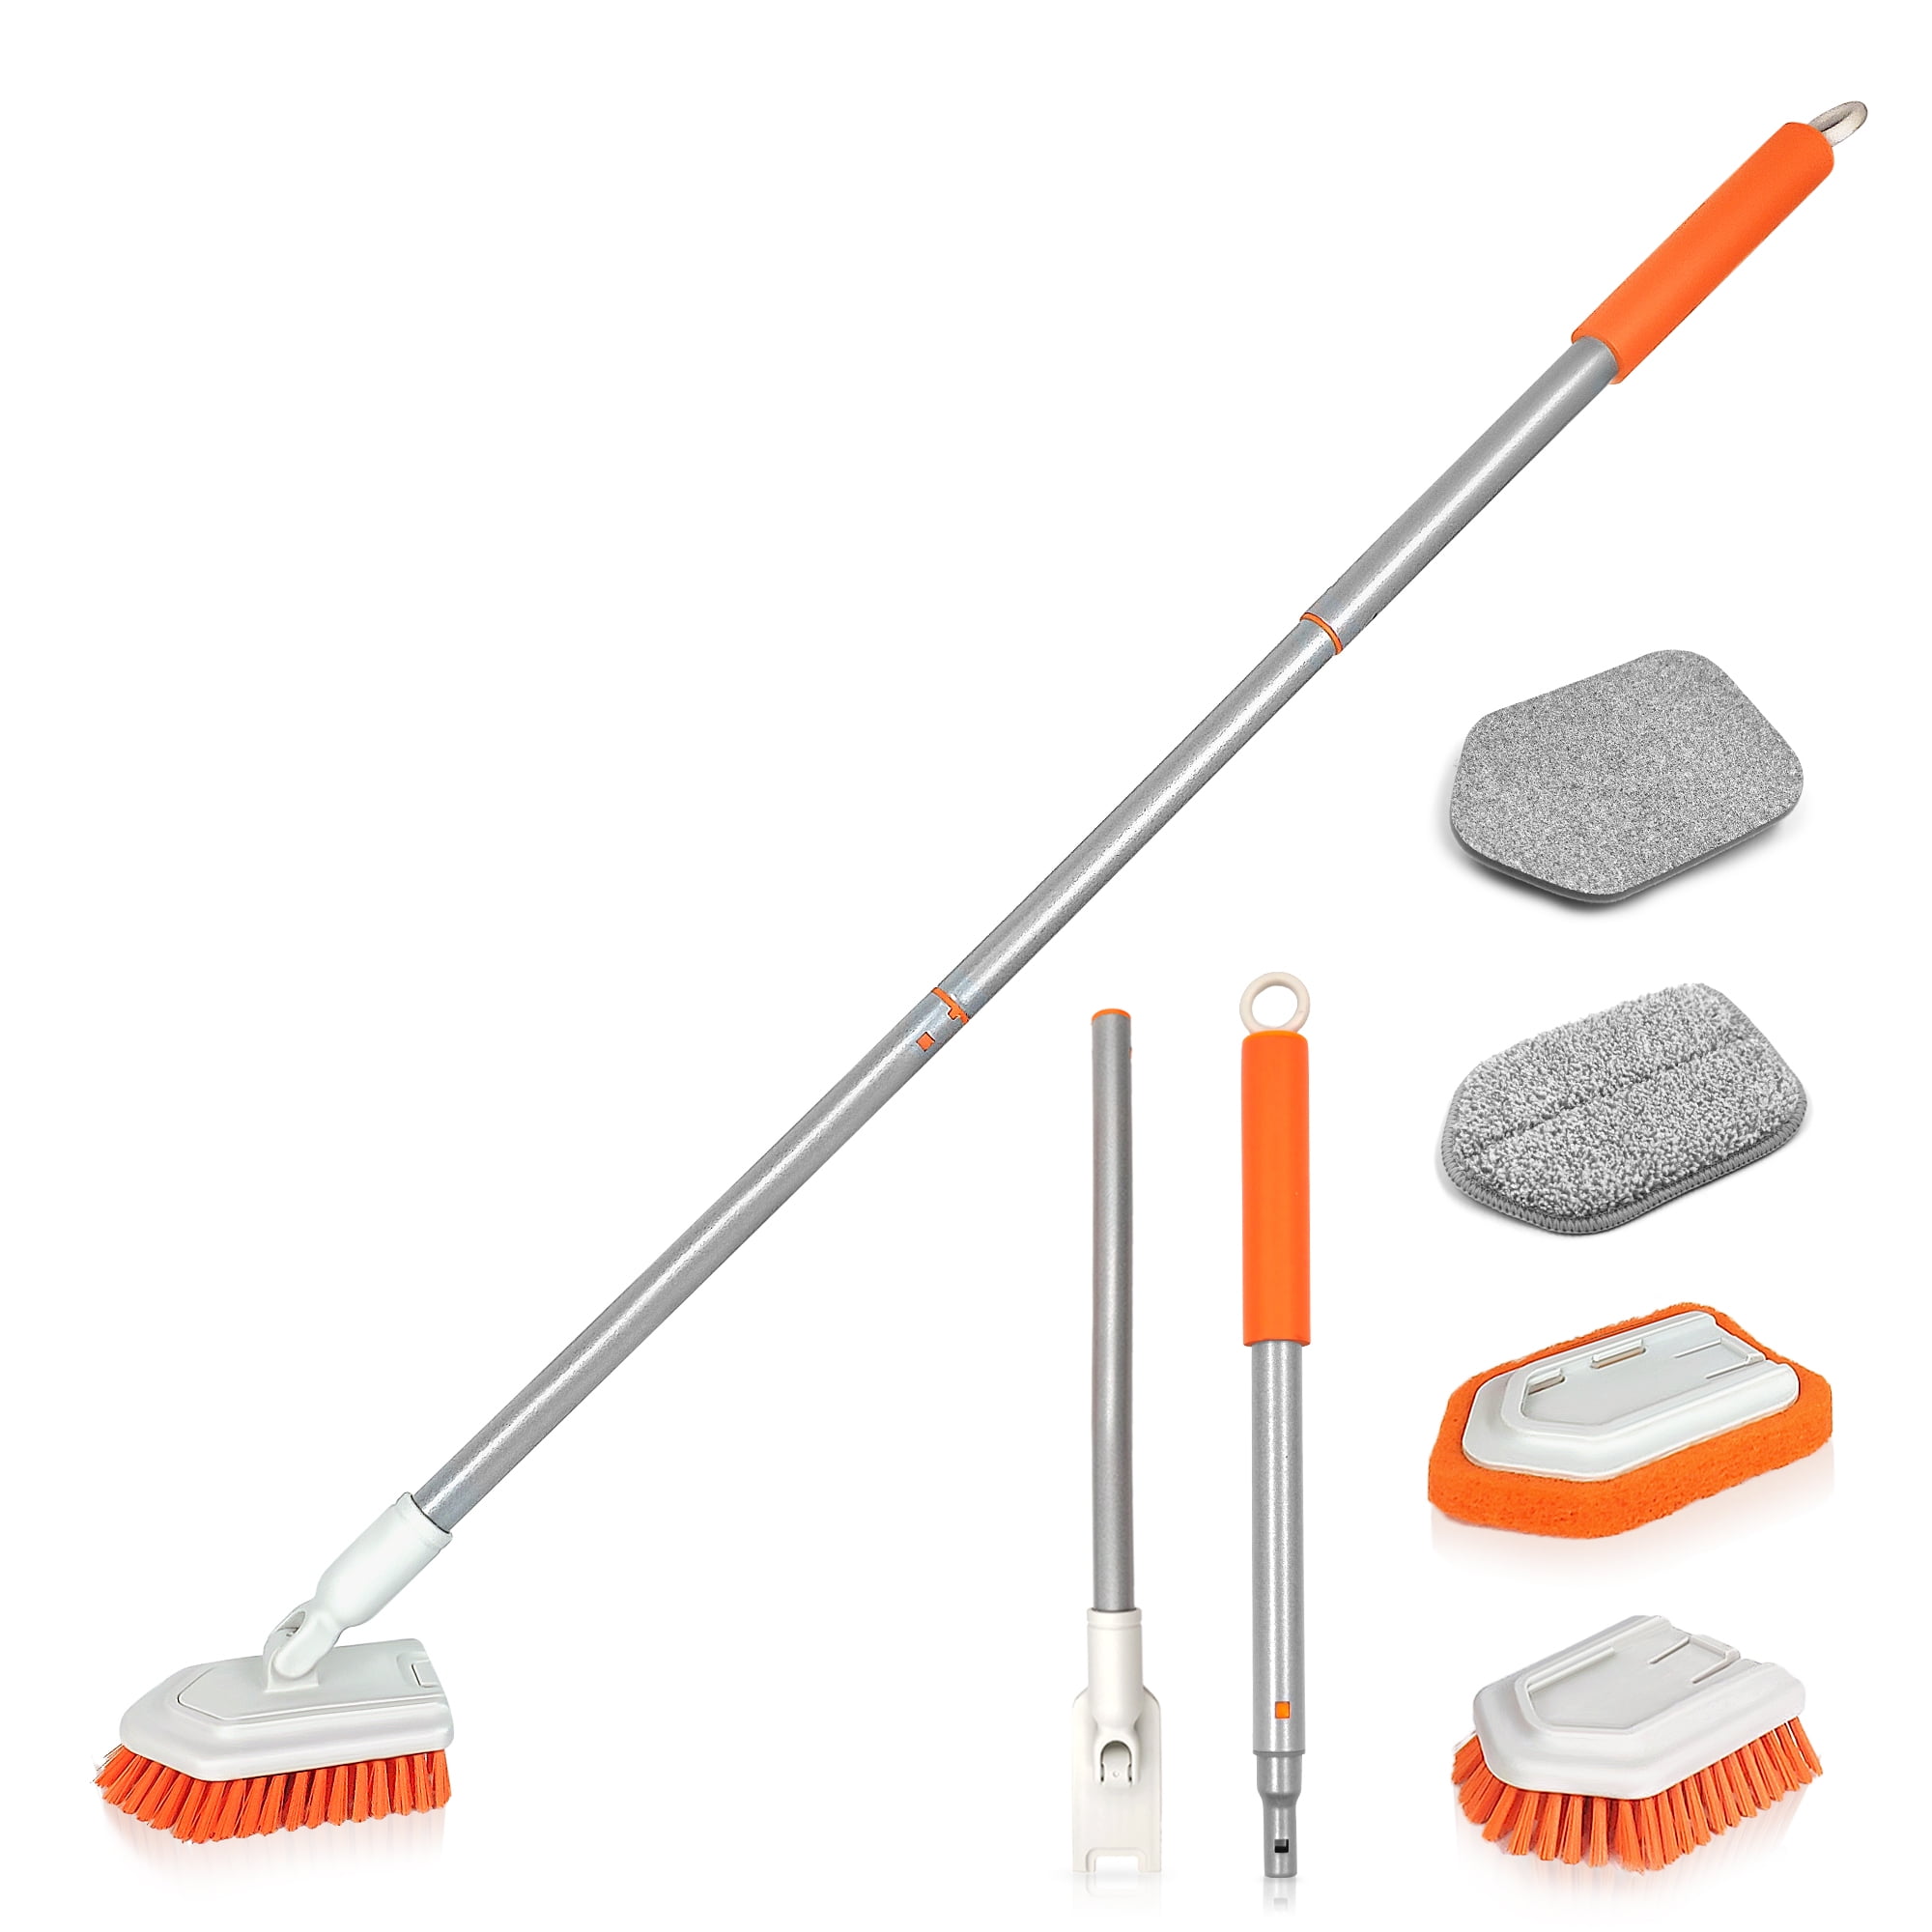 JEHONN Tub and Tile Scrubber with Long Handle, Shower Cleaning Brush with 2 Interchangeable Scrub Brush for Bathroom, Bathtub, Wall, Floor, Men's